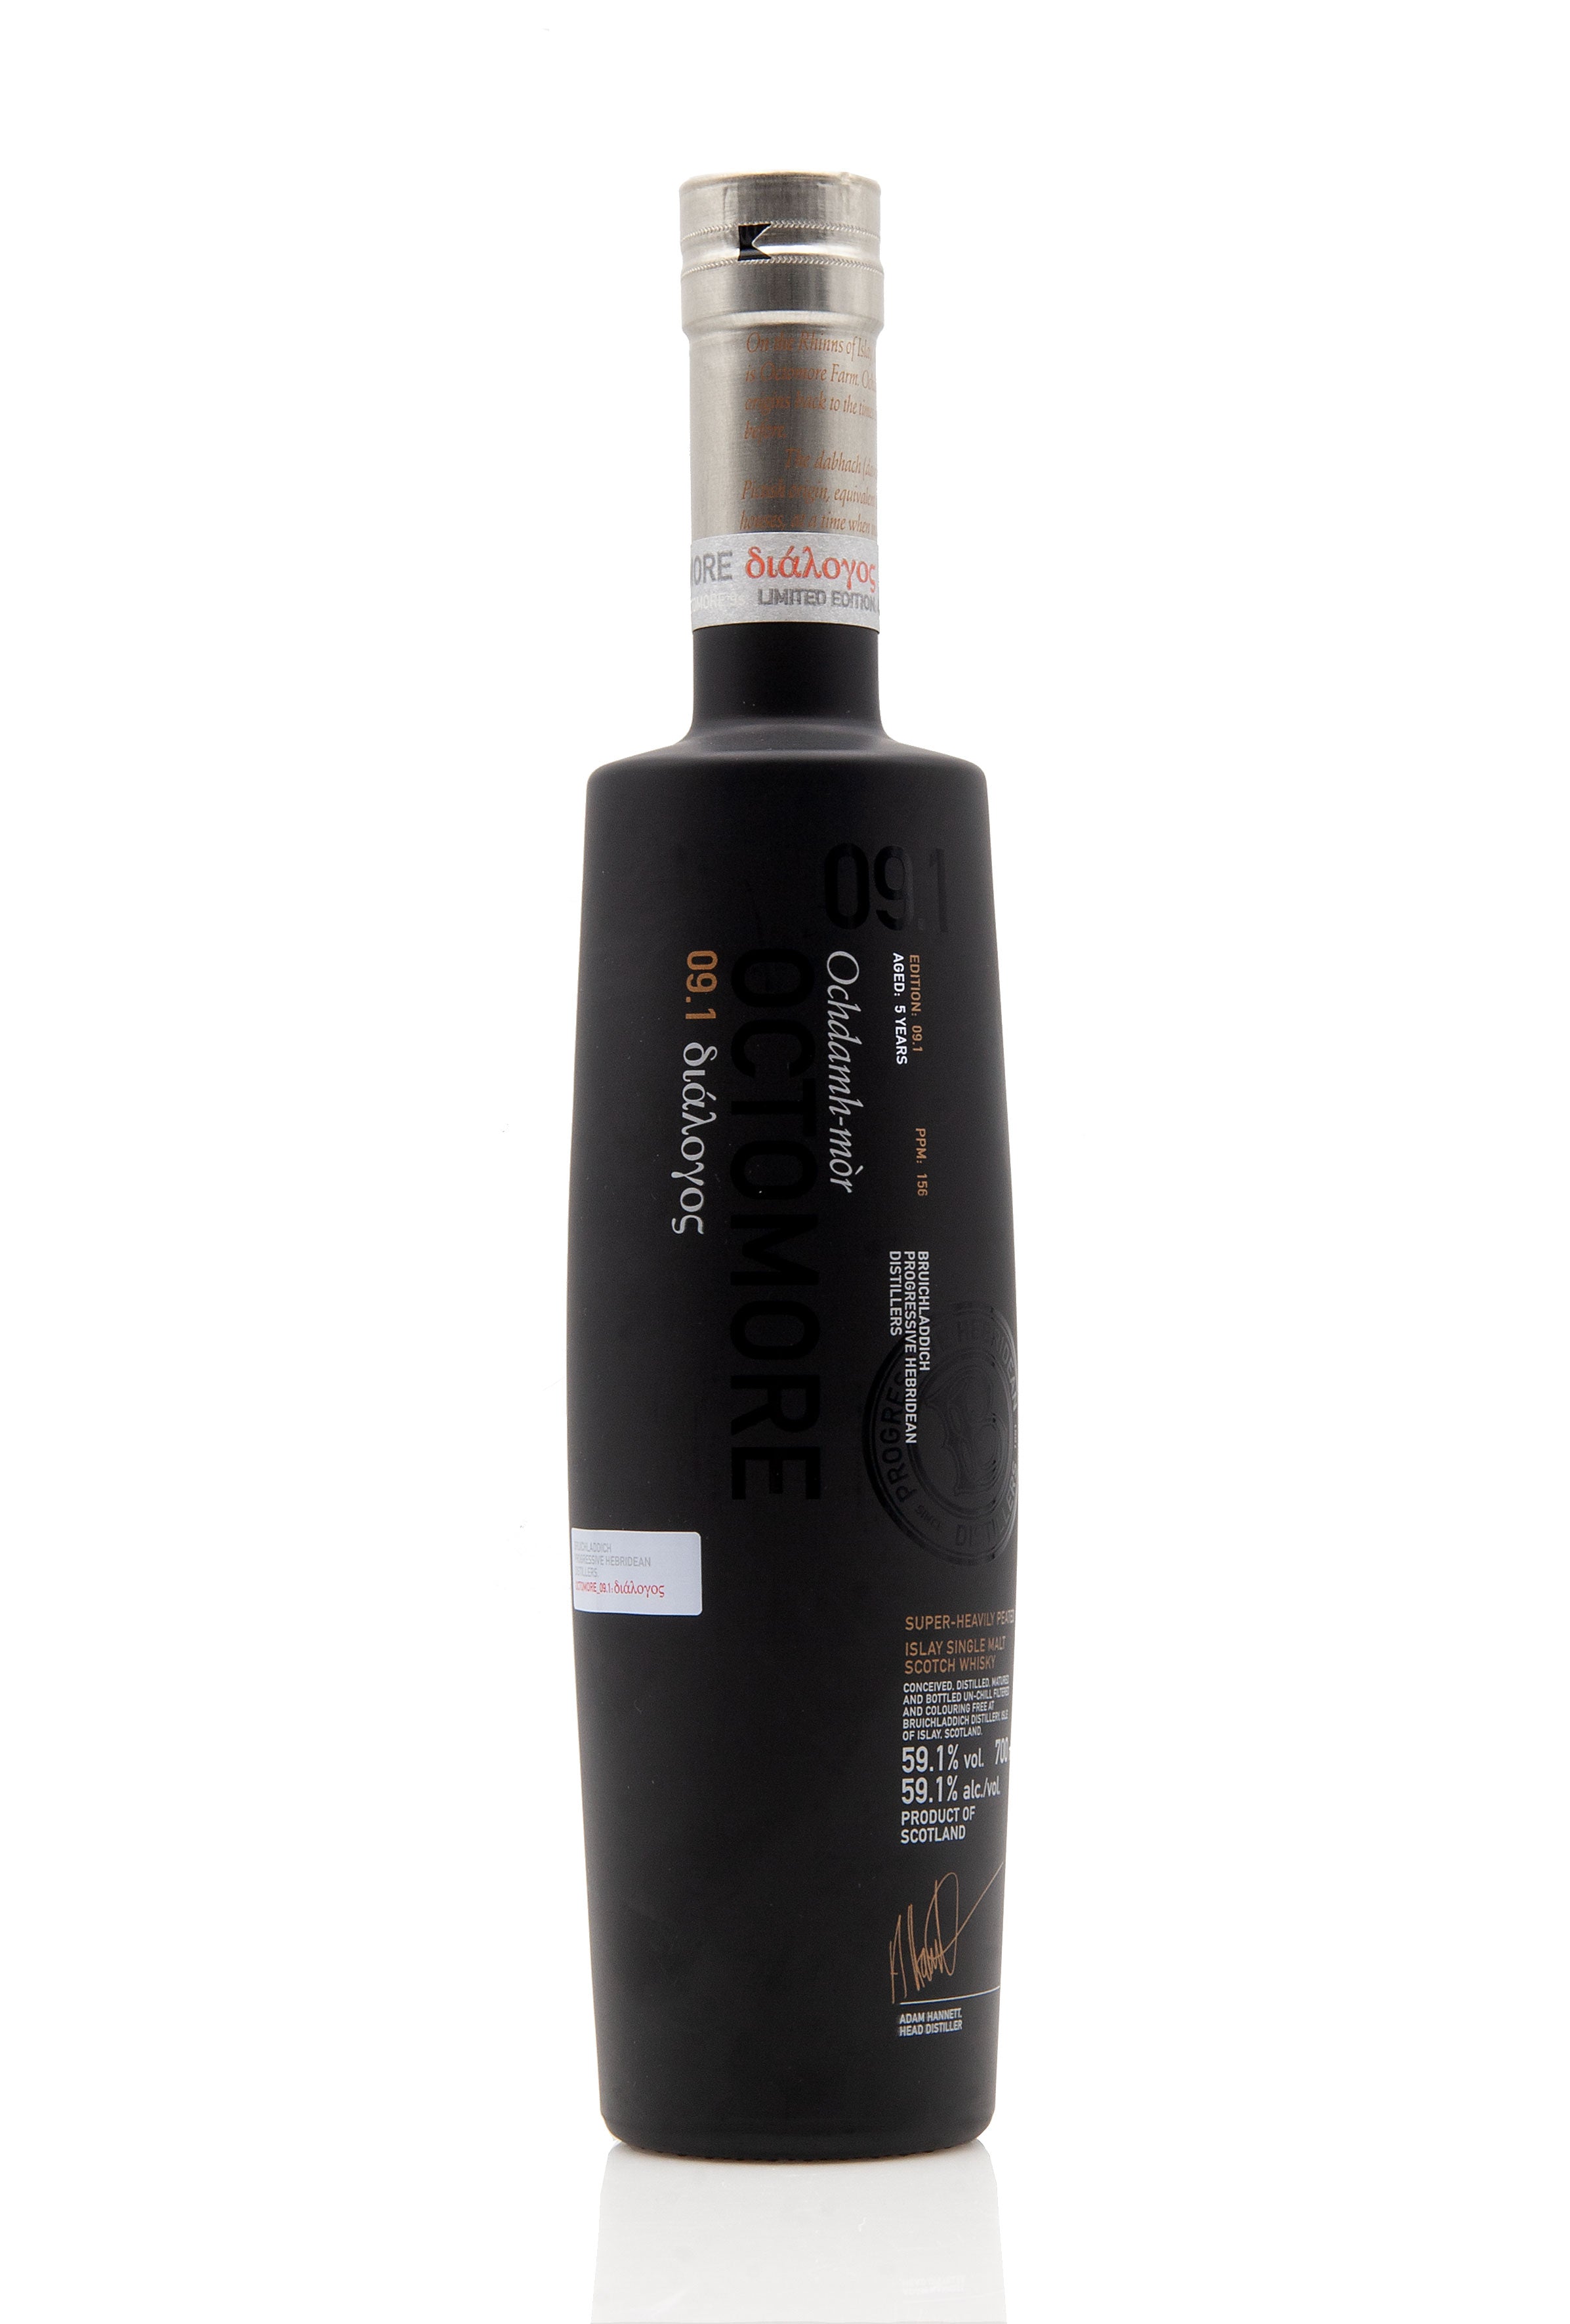 Octomore 9.1 | 5 Year Old | Bruichladdich Islay Whisky | Abbey Whisky